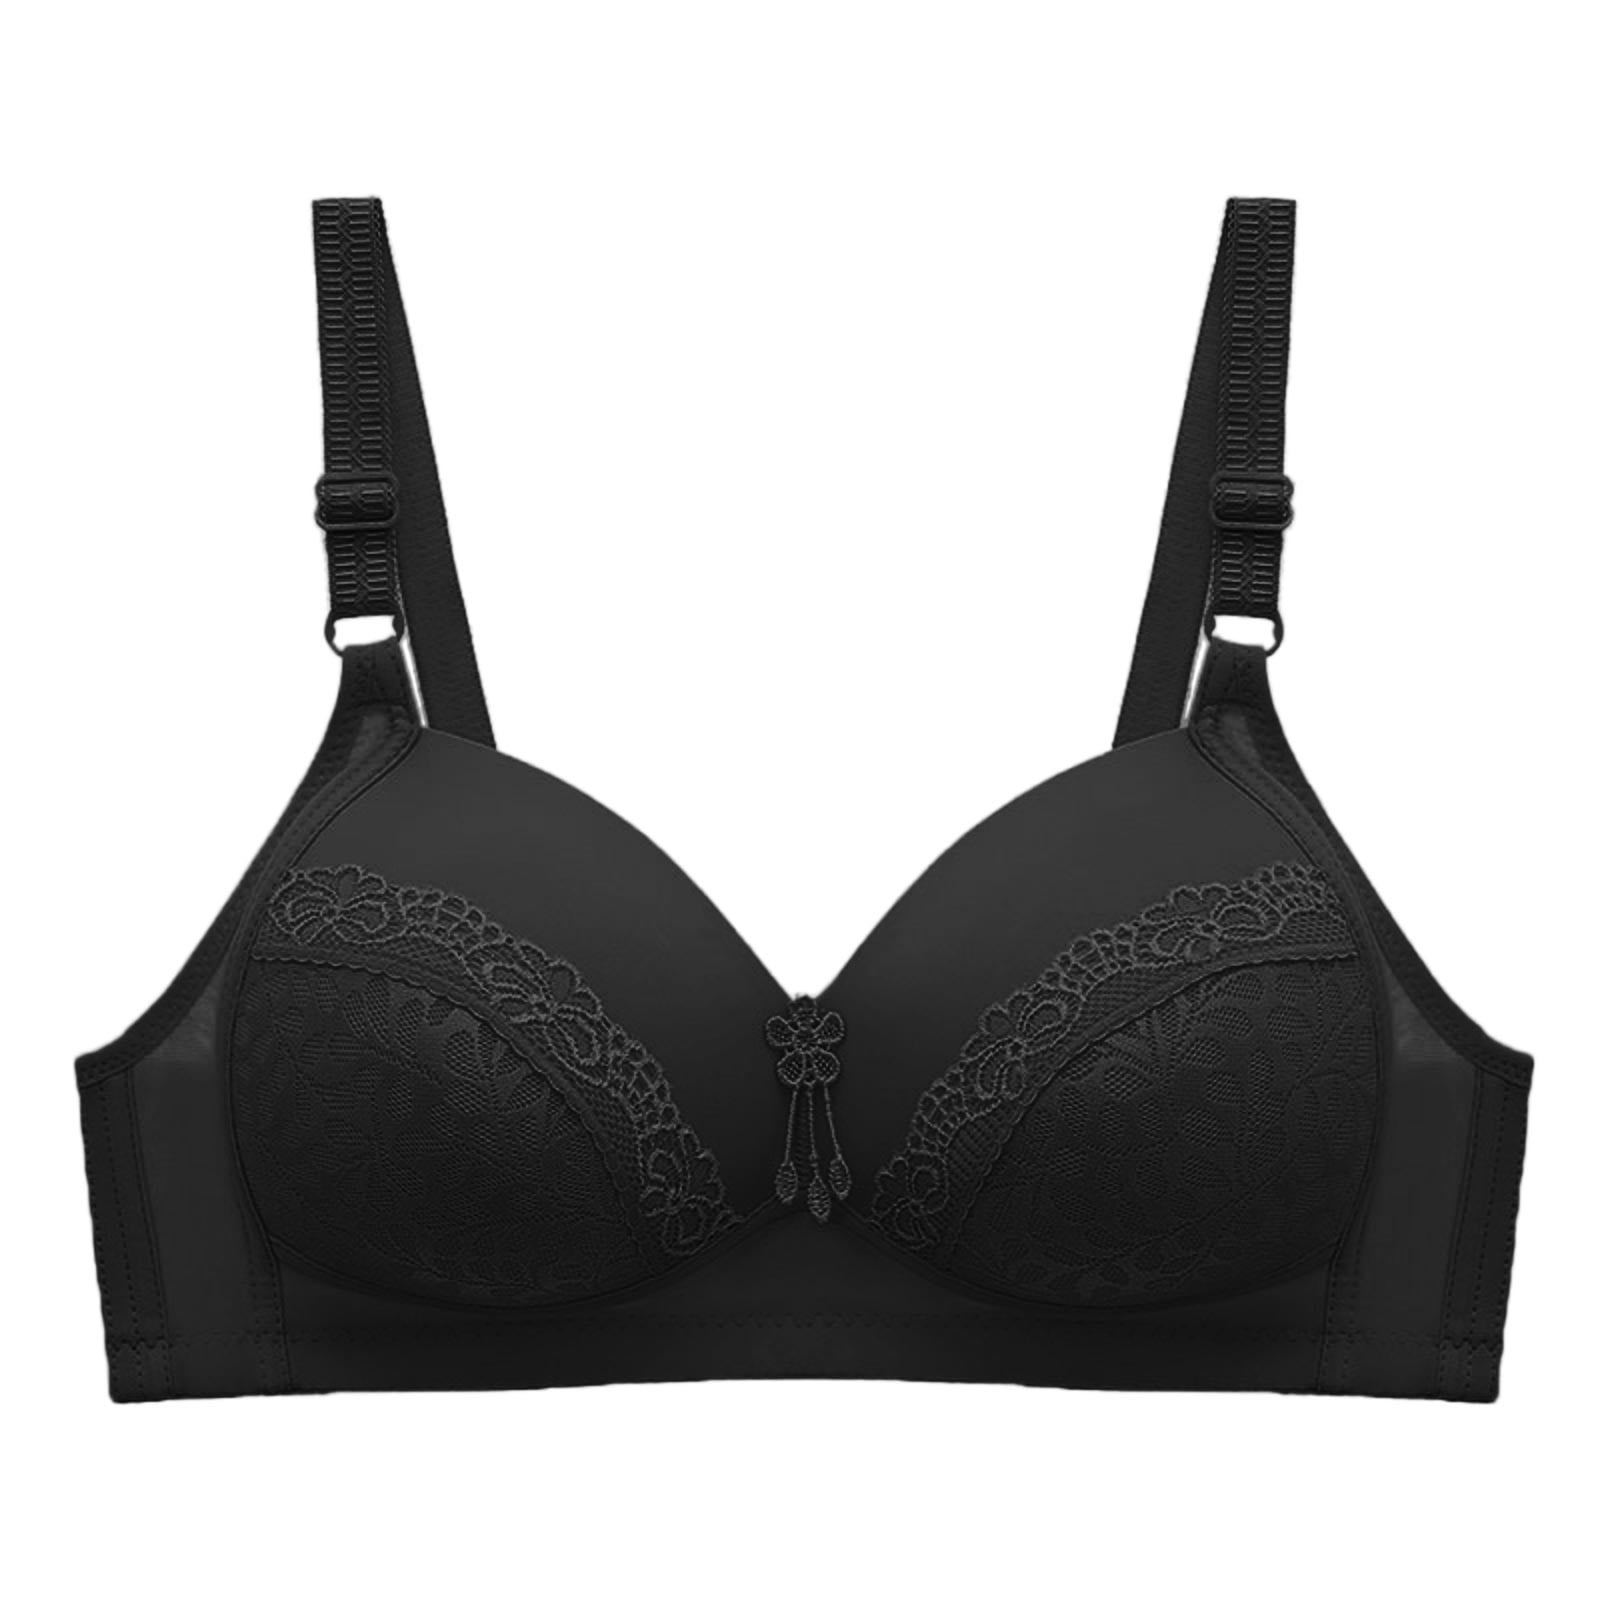 Outfmvch Push Up Bras For Women Bralettes For Women Wireless Bra Double  Support Wireless Bra Lace Bra With Straps Full Coverage Wirefree Bra  Tagless